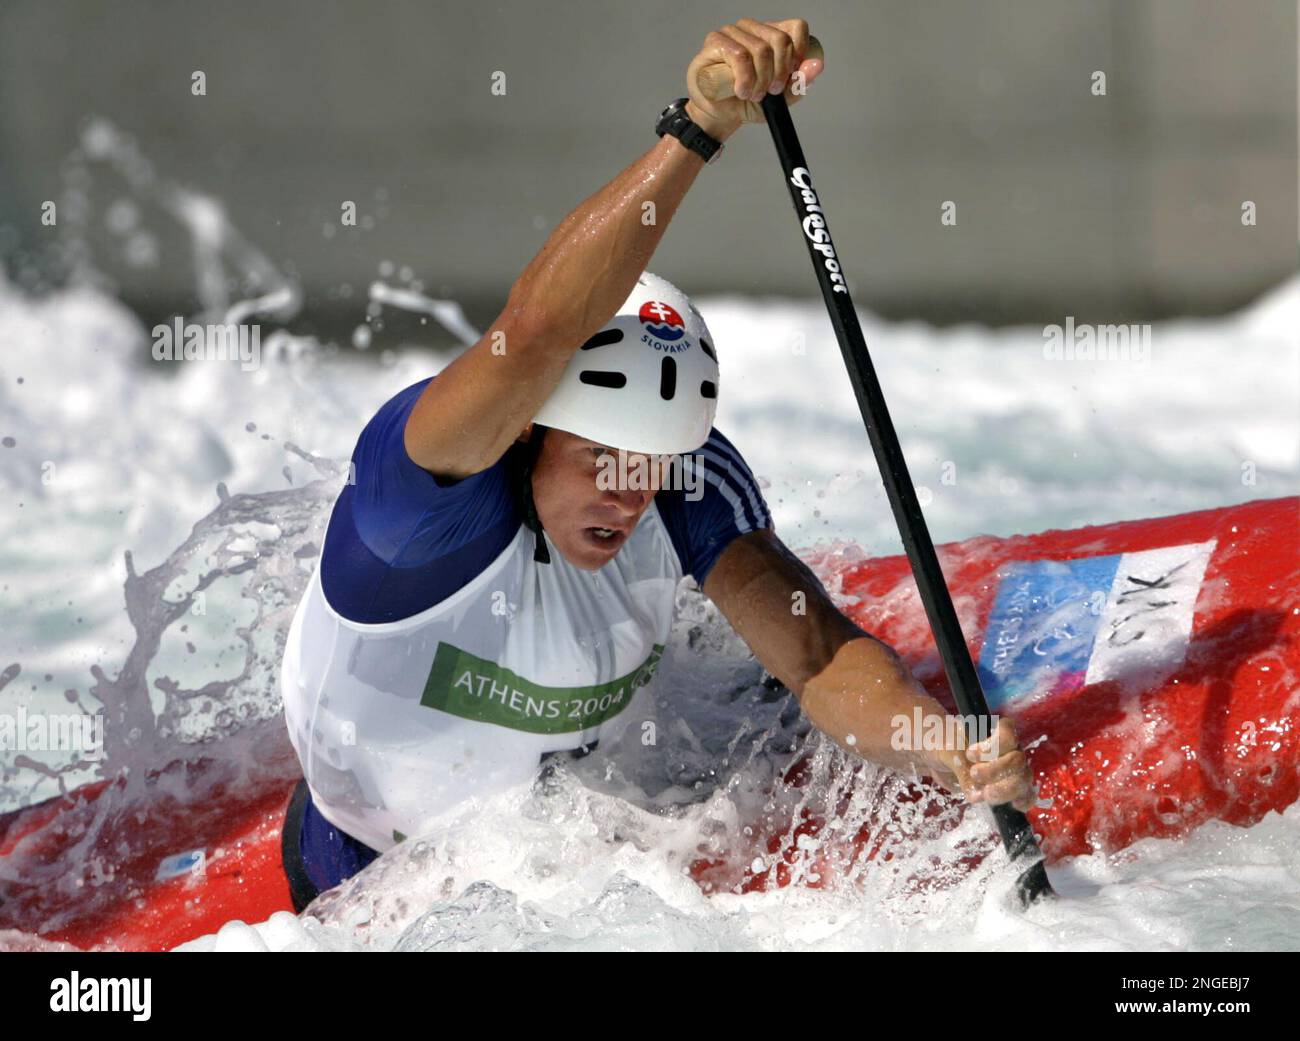 Slovakias Michal Martikan competes in the C1 mens canoe single category semifinal at the Olympic Canoe-Kayak slalom venue of the Helliniko Sports Complex in Athens during the 2004 Olympic Games , Wednesday